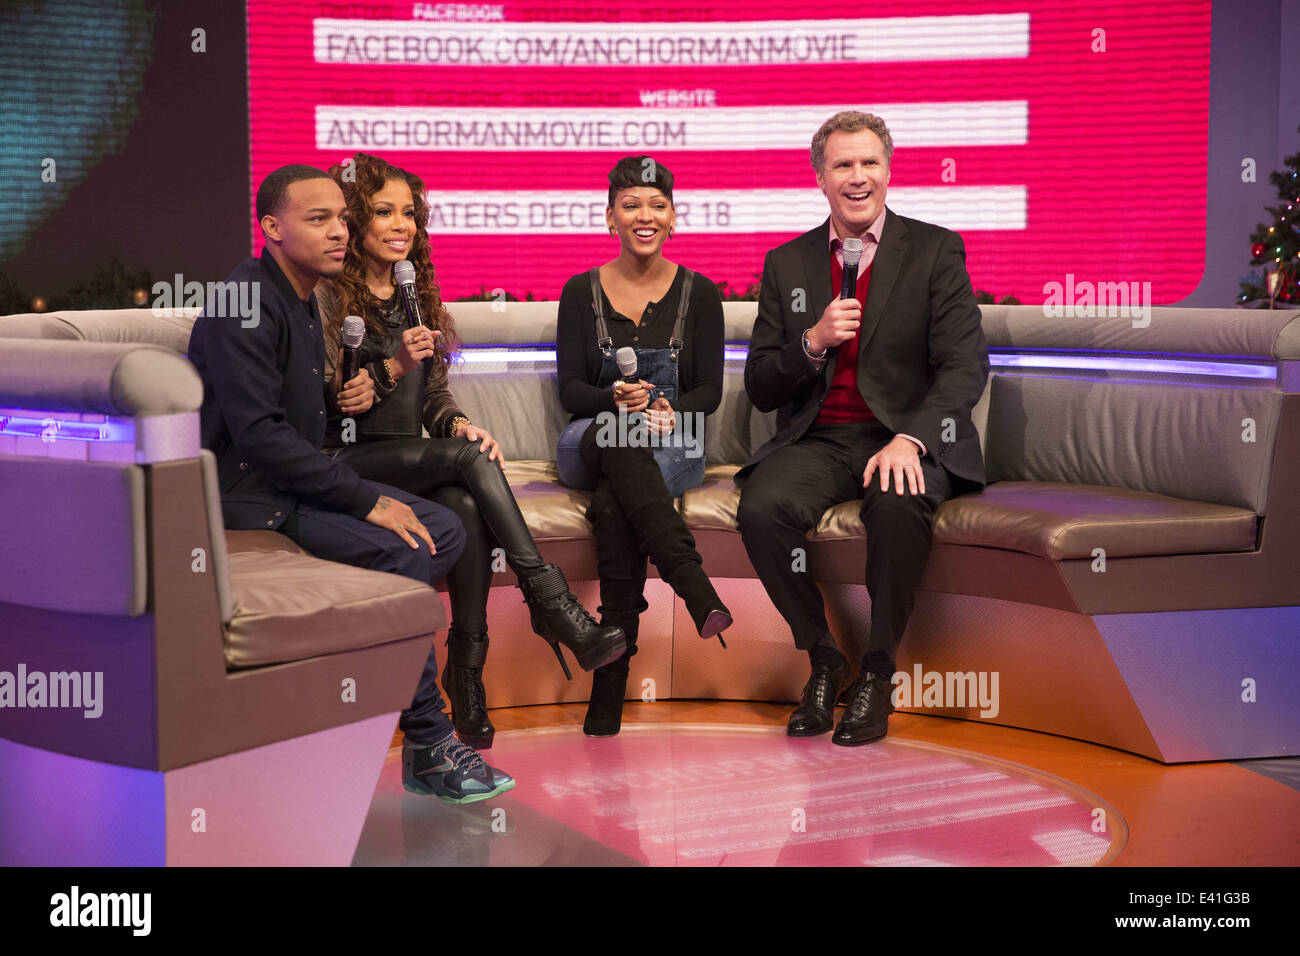 BET's 106 & Park show host guest stars Will Ferrell and Meagan Good to promote new movie Anchorman II  Featuring: Bow Wow,Keshia Chanté,Meagan Good,Will Ferrell Where: New York, New York, United States When: 17 Dec 2013 Stock Photo